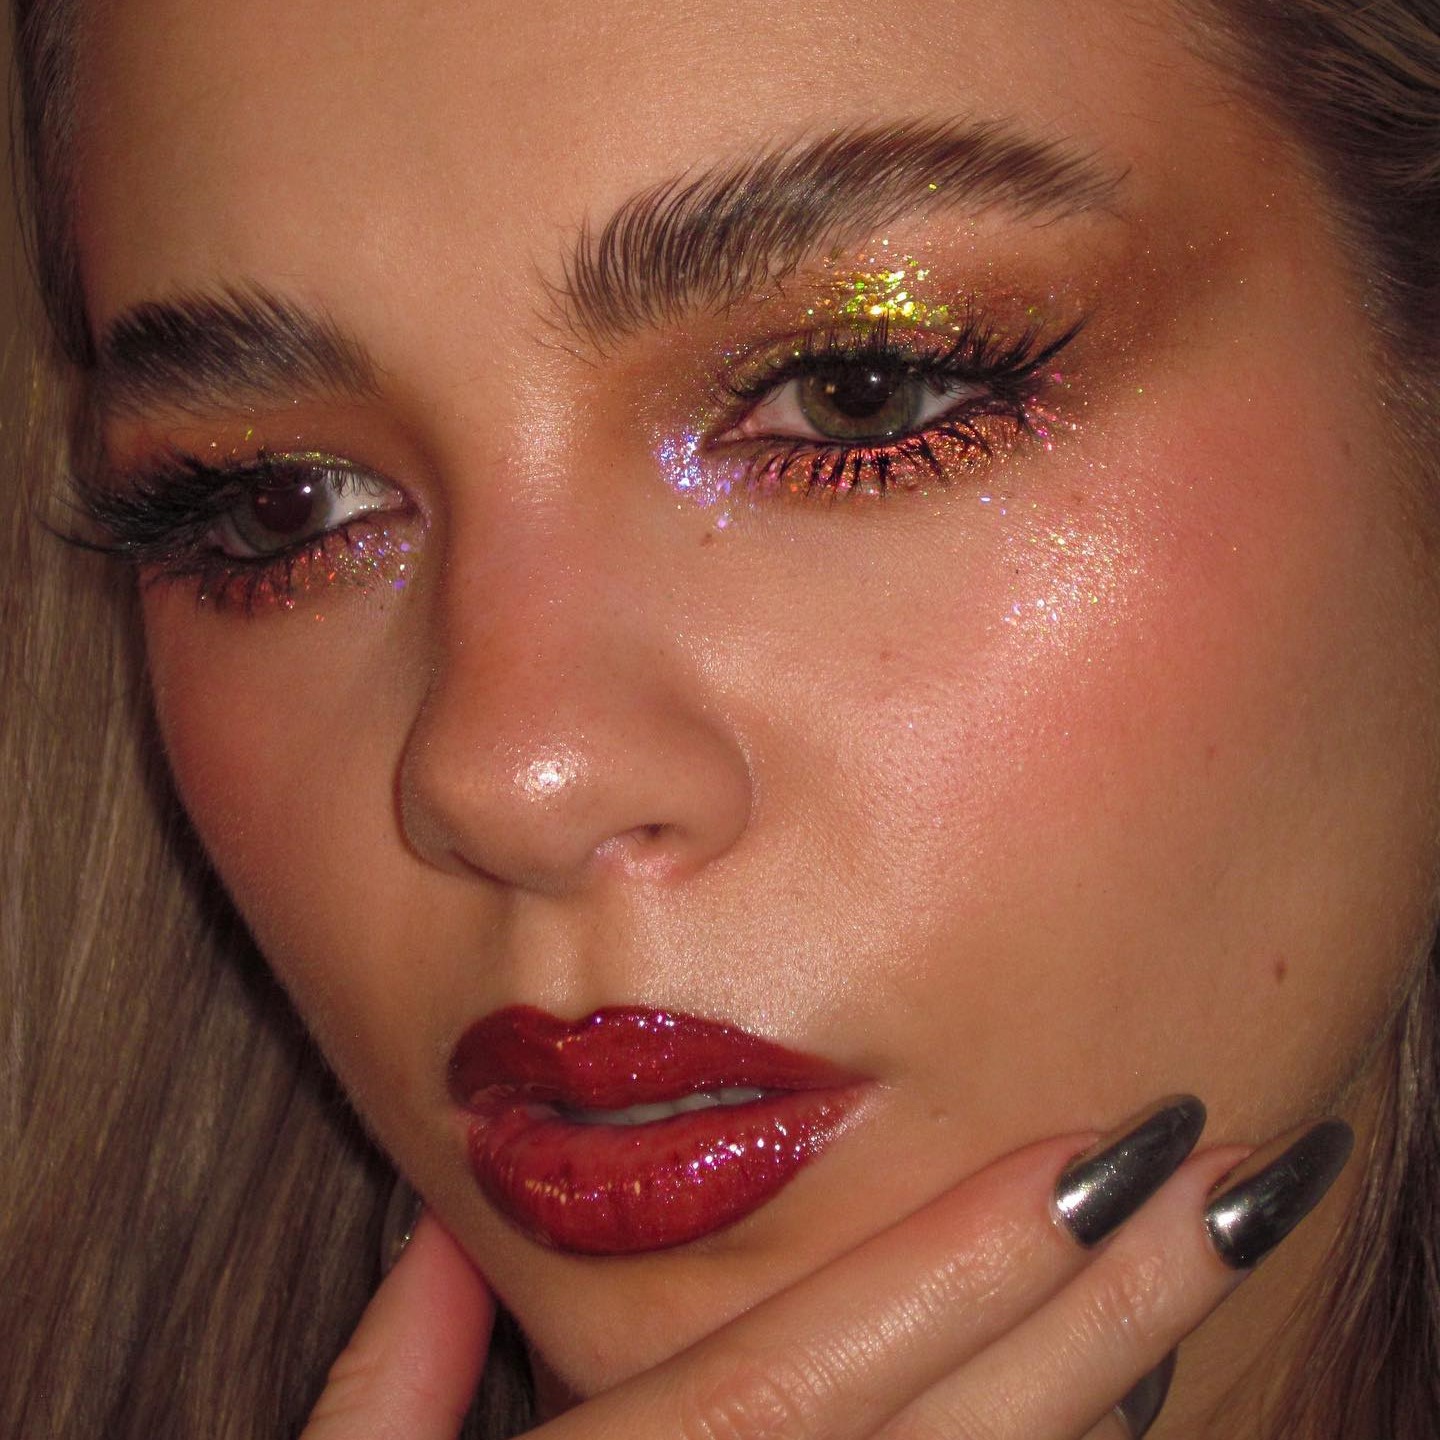 How to Get A Glitter Eyeshadow Makeup Look